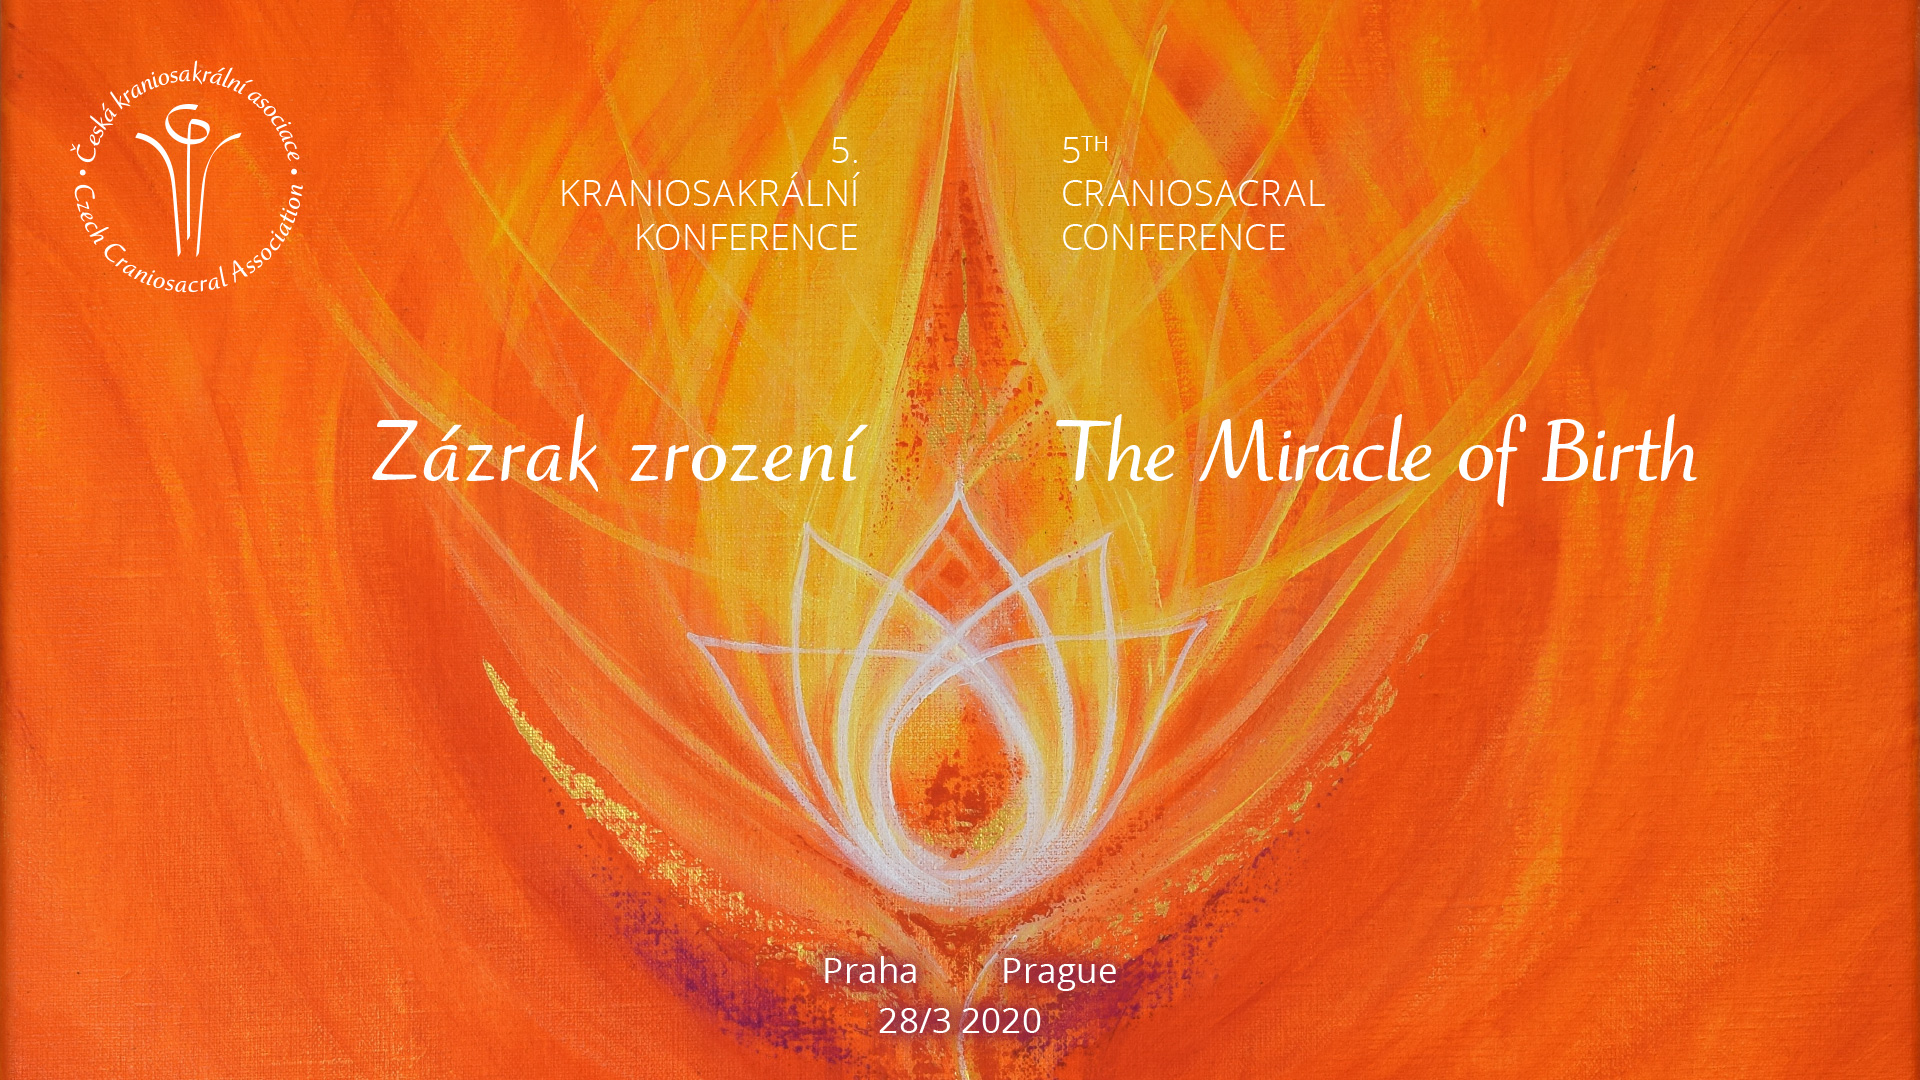 The Miracle of Birth - 5th Czech Craniosacral Conference 